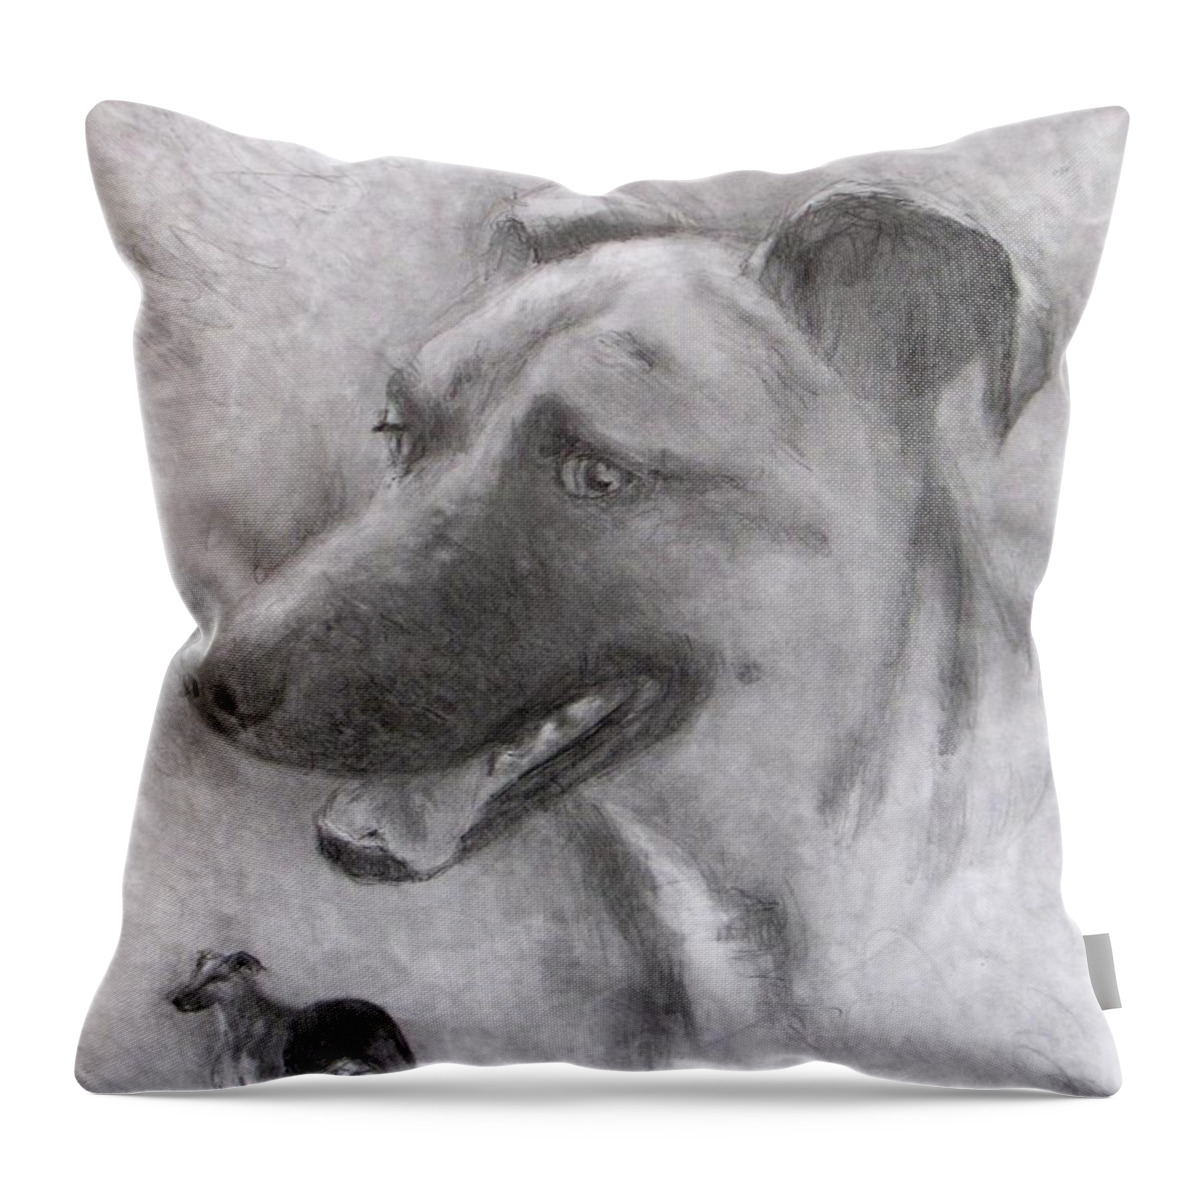  Dog Throw Pillow featuring the drawing Eliot by Jack Skinner